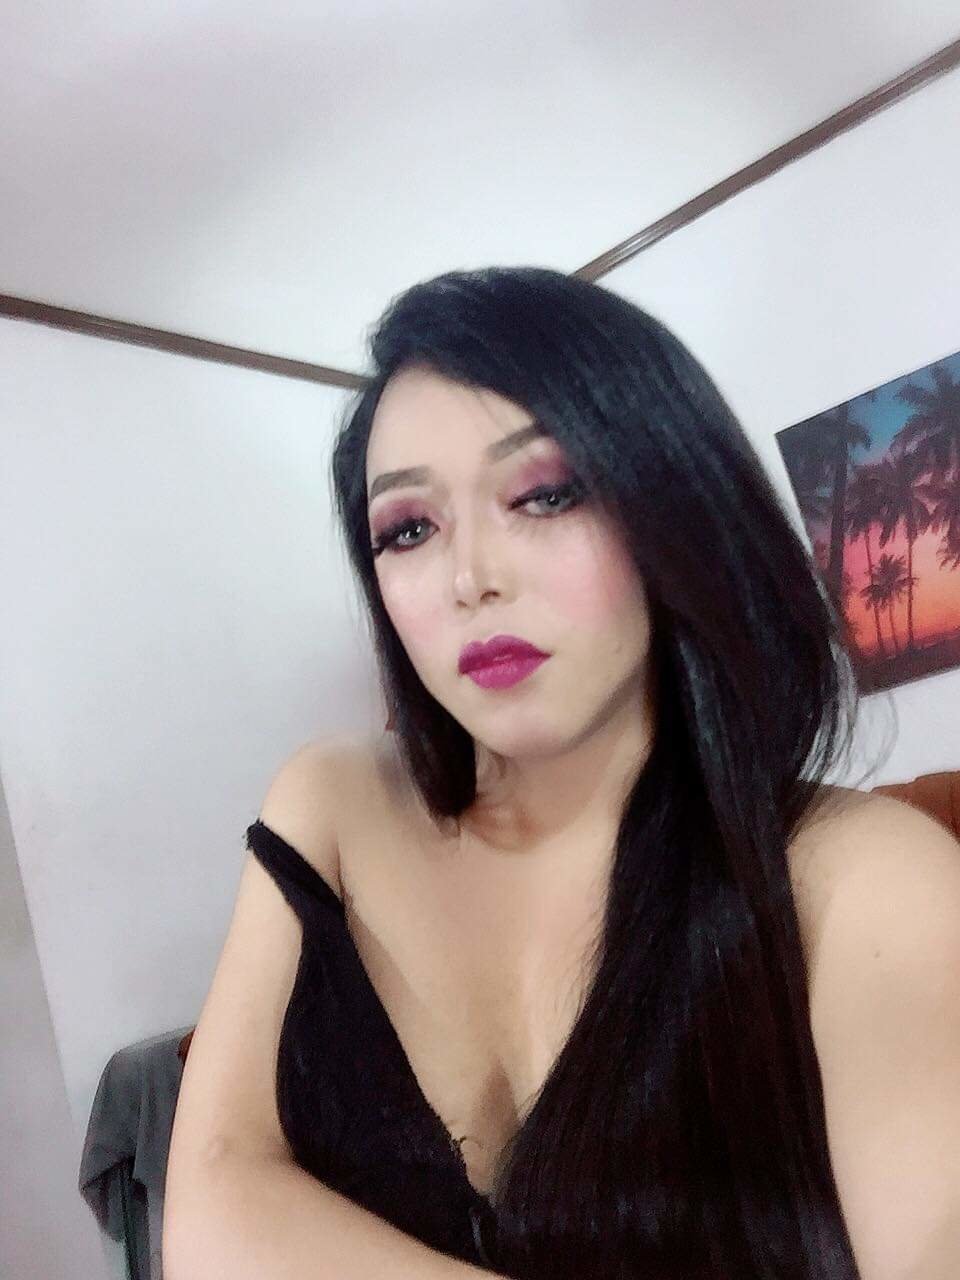 Available service Cam show TS Angelica, Filipino Transsexual. 